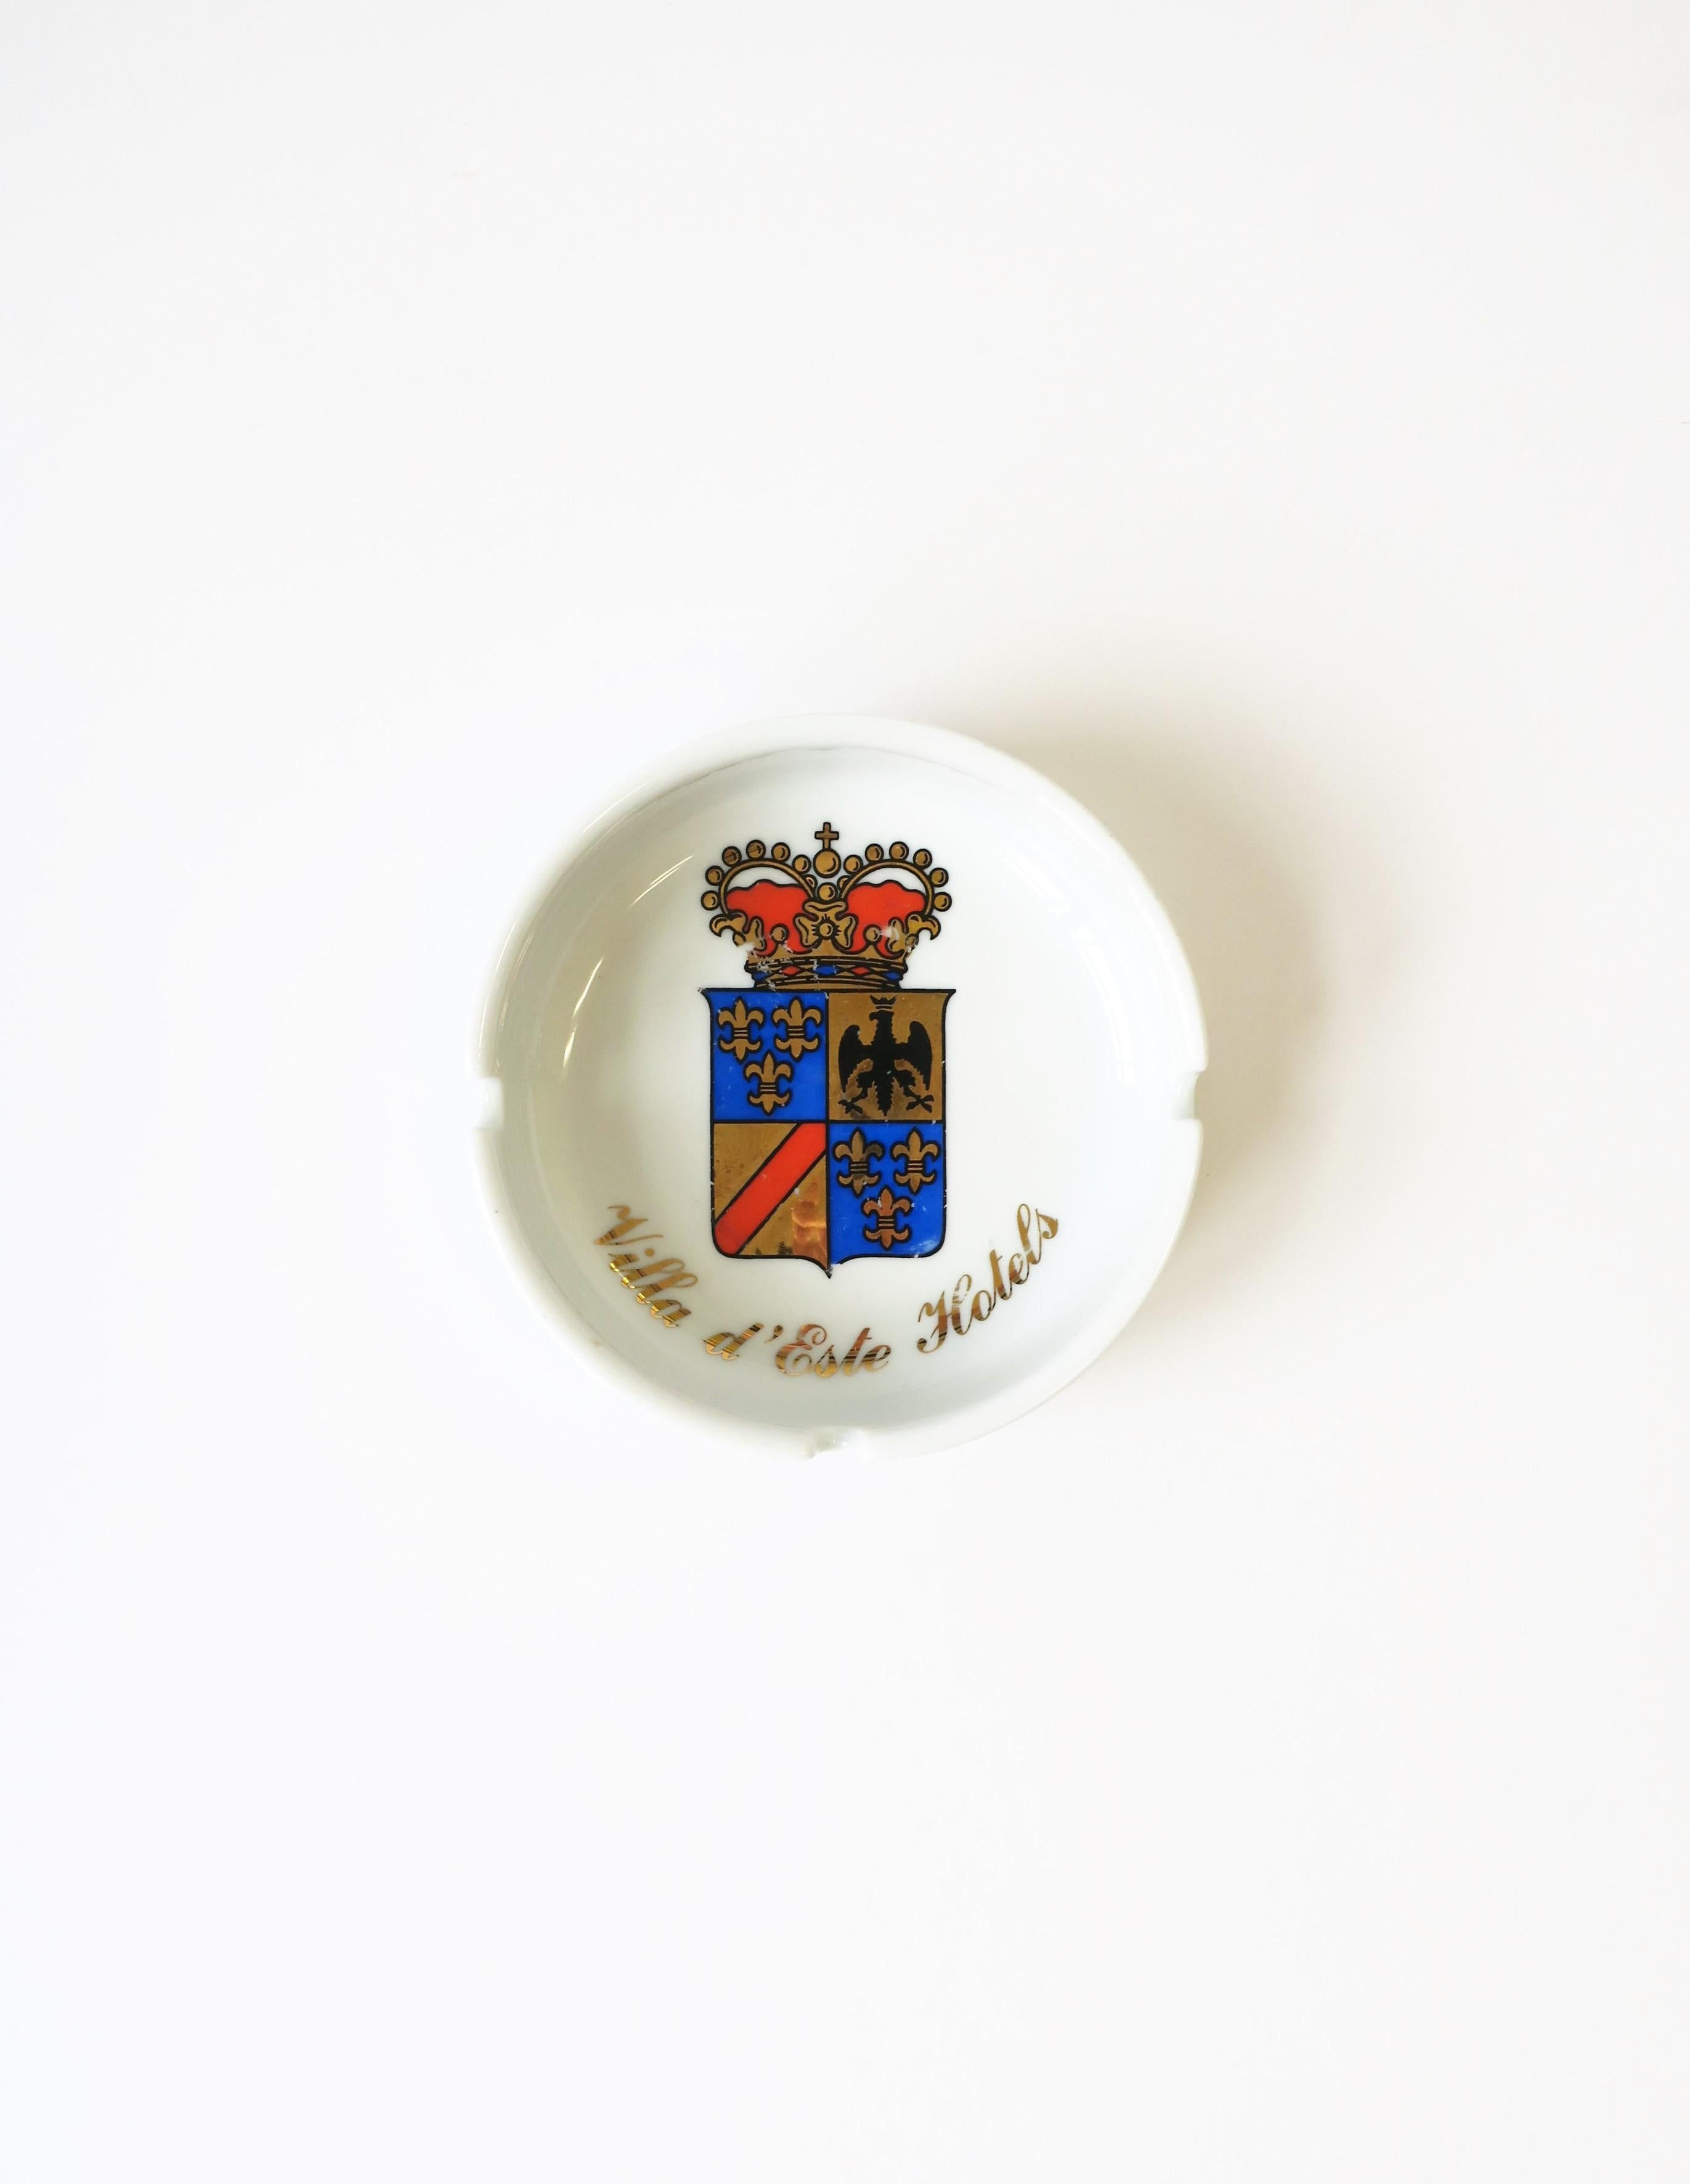 A Richard Ginori white porcelain ashtray or catchall for the iconic Villa d'Este Hotel Italy, circa early mid-20th century, Italy. Hotels' crest at center in black, gold, royal blue and red/orange. A great catchall for small jewelry or other small